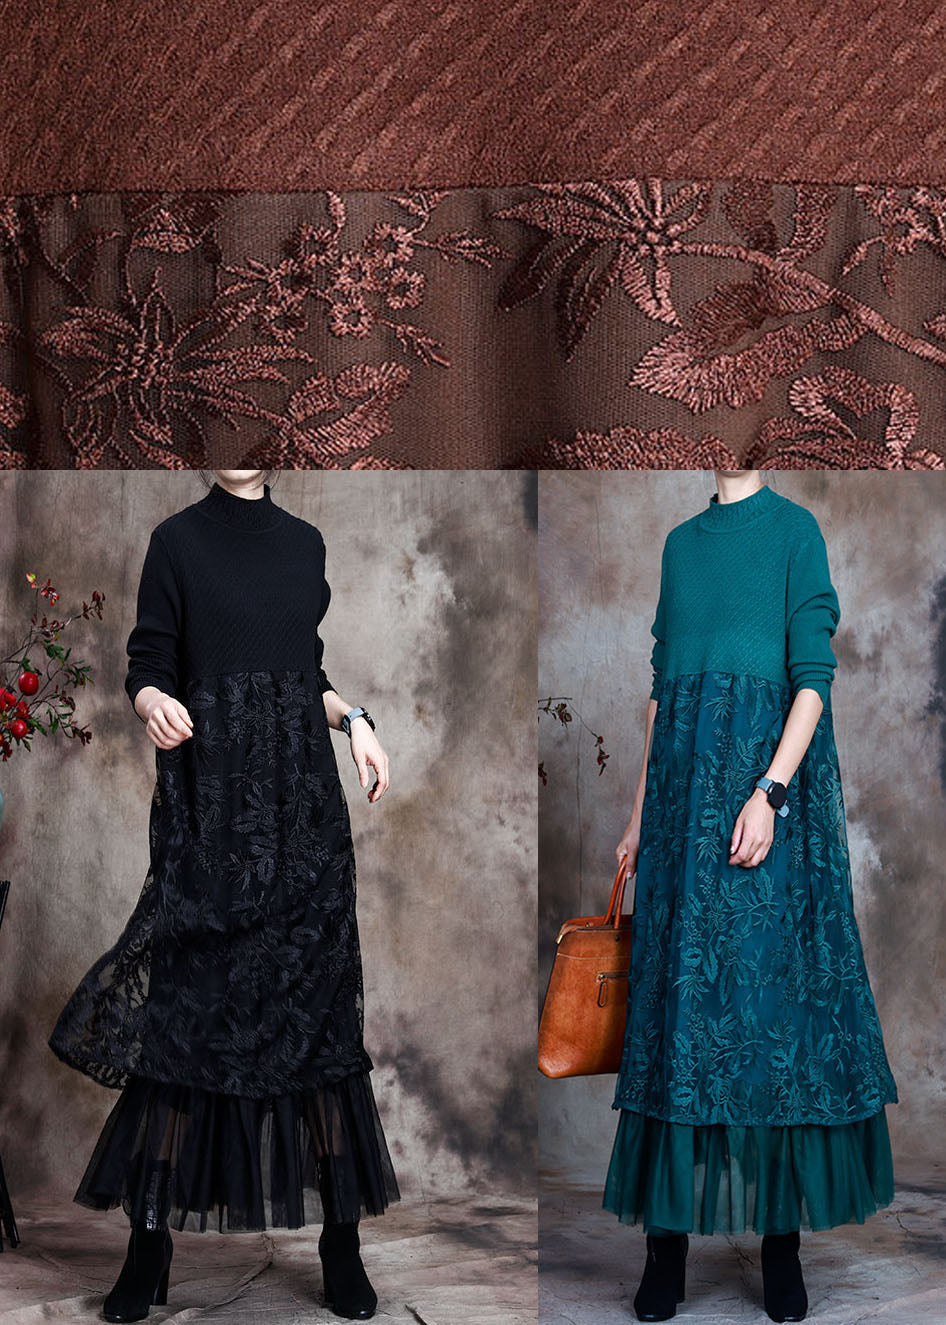 Chocolate O-Neck Embroideried Patchwork Fall Long Knit Dress